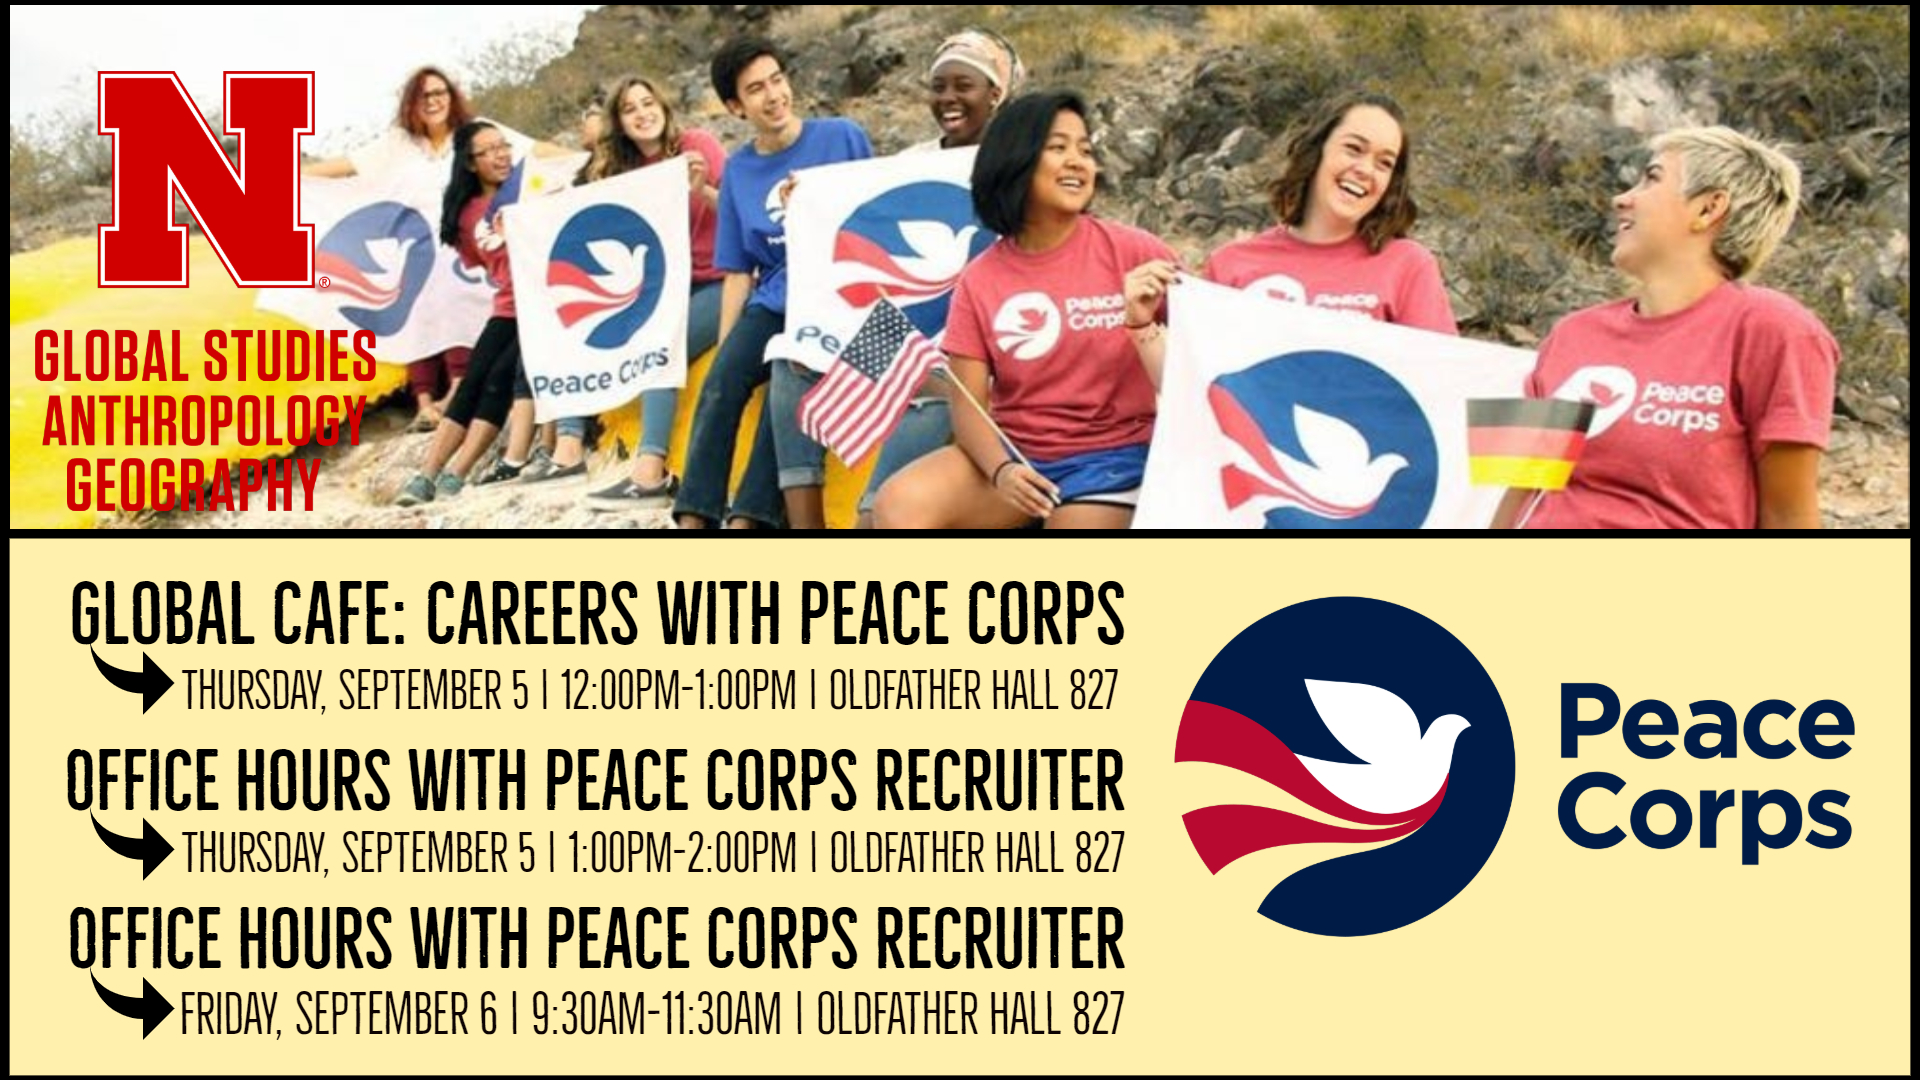 Peace Corps Events Announce University of NebraskaLincoln